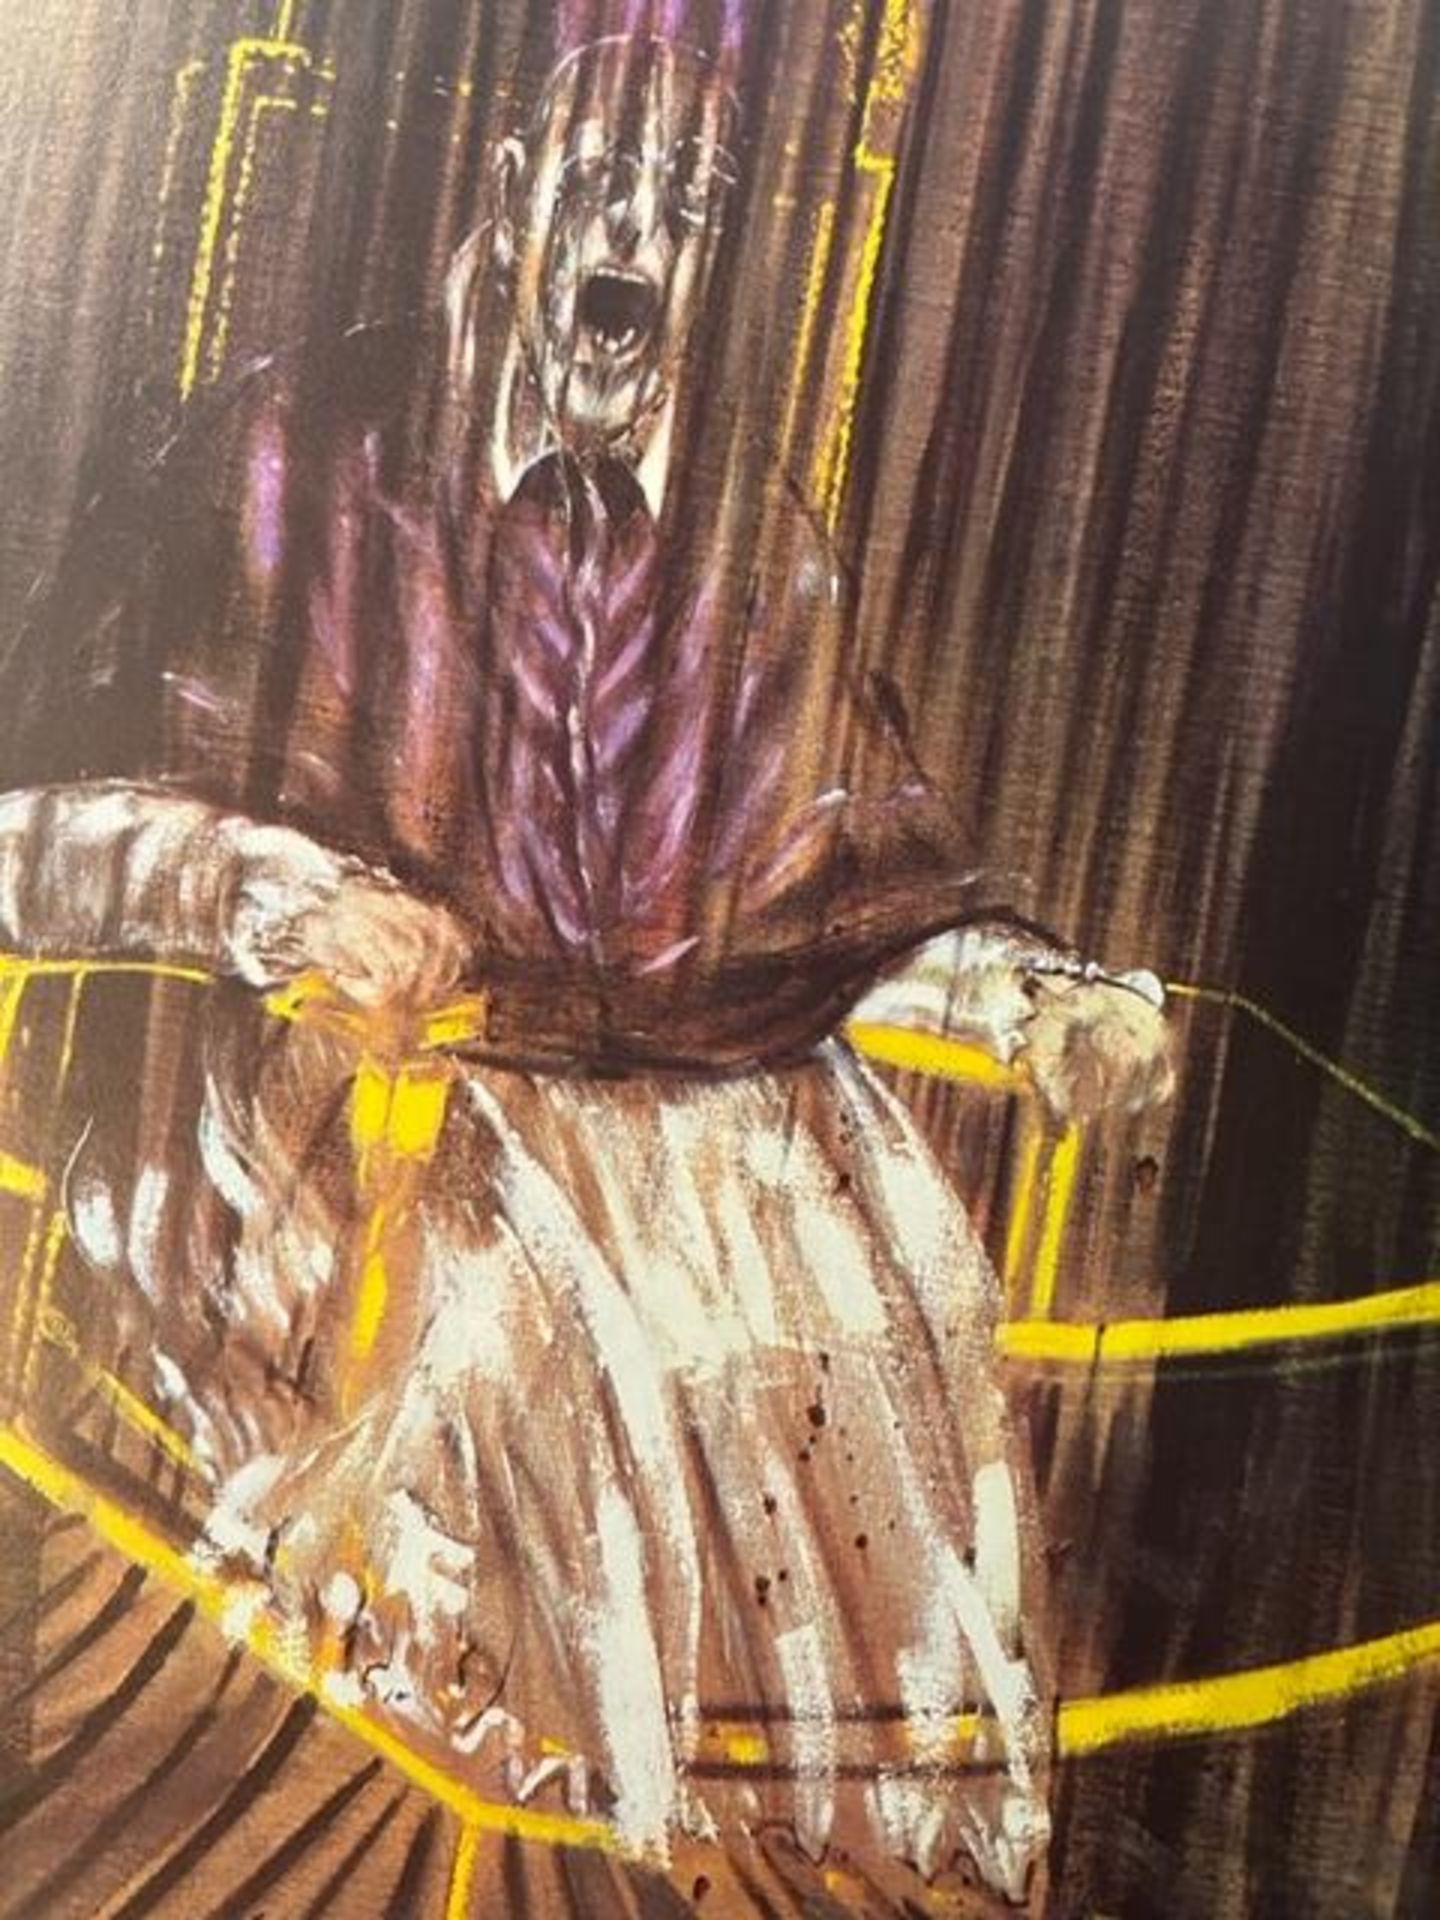 Francis Bacon "Study after Velazques's Portrait of Pope Innocent X" Print. - Image 6 of 6